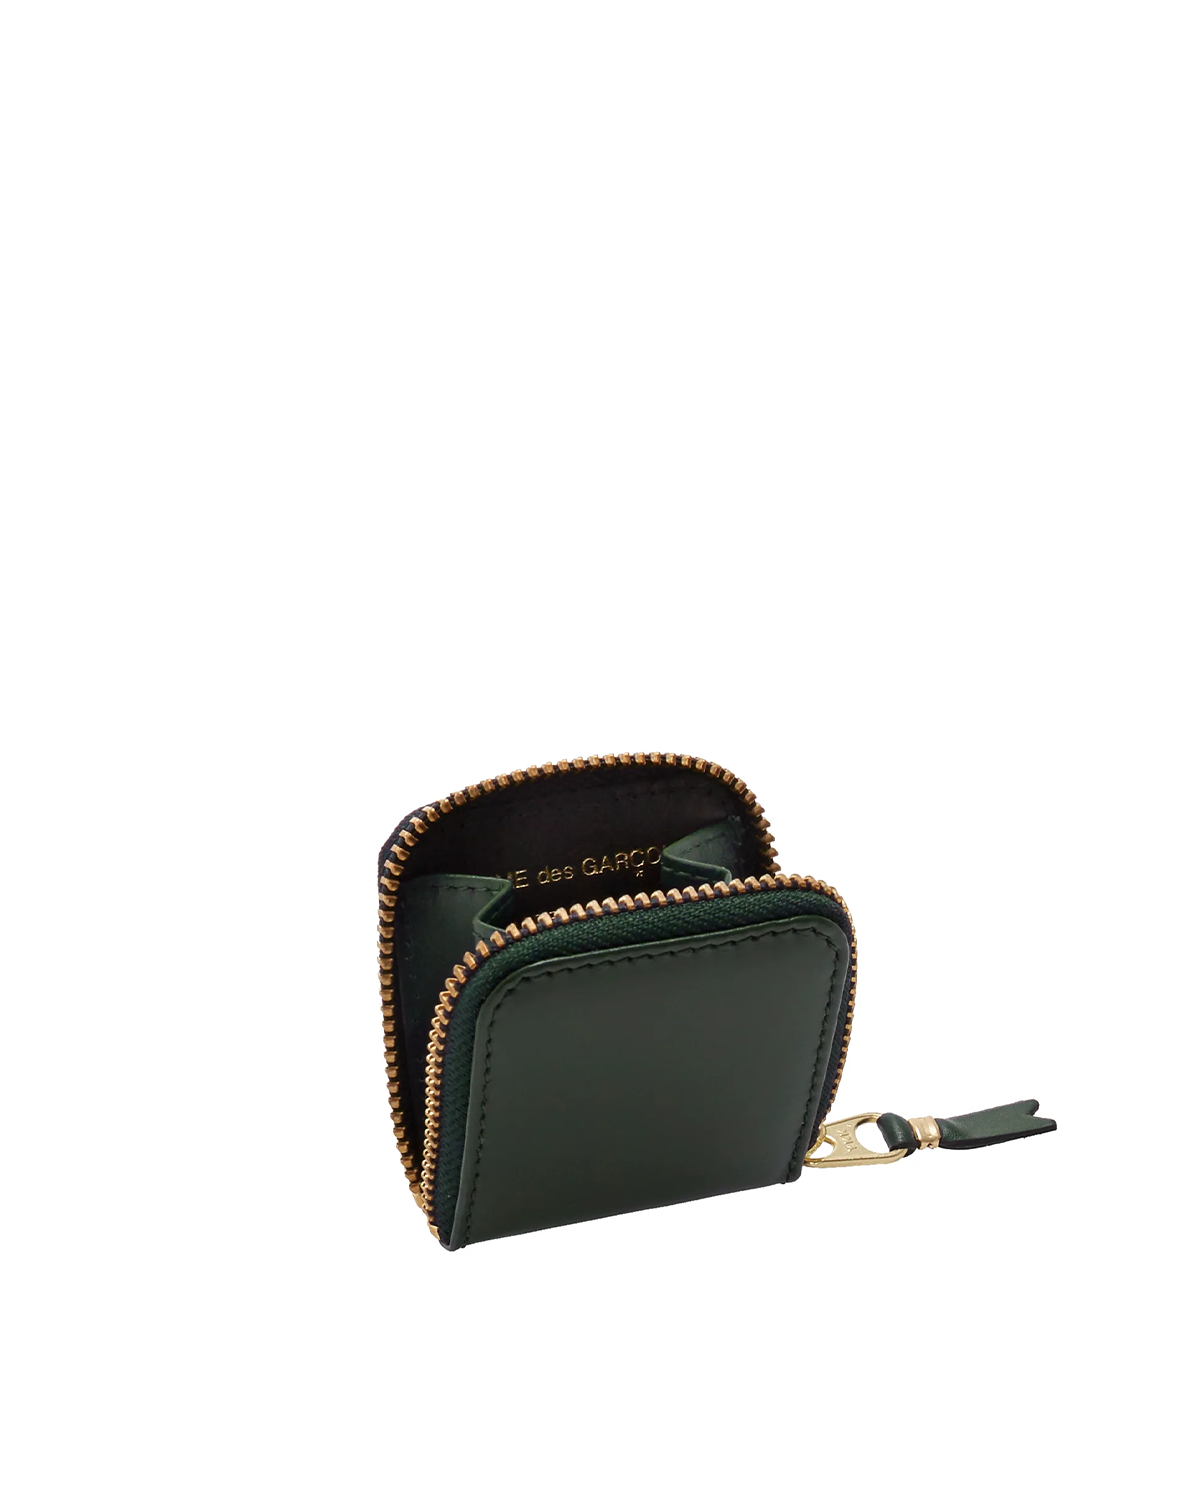 Classic Leather Zip Coin Pouch Bottle Green